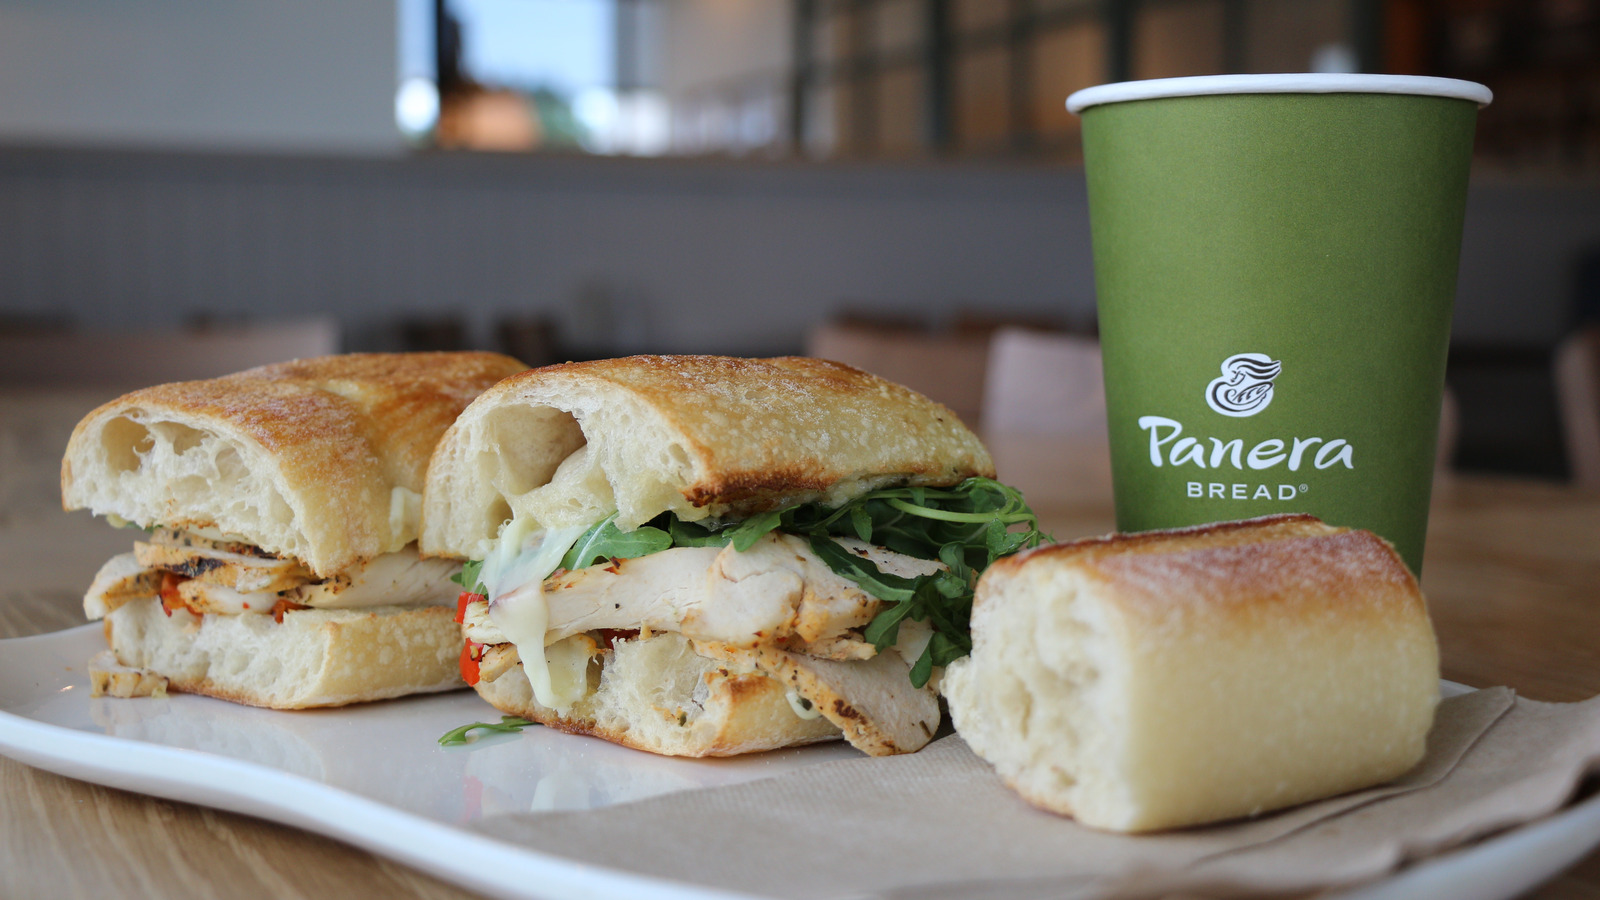 Here's How You Can Score One Of Panera's Brand New Sandwiches For Free